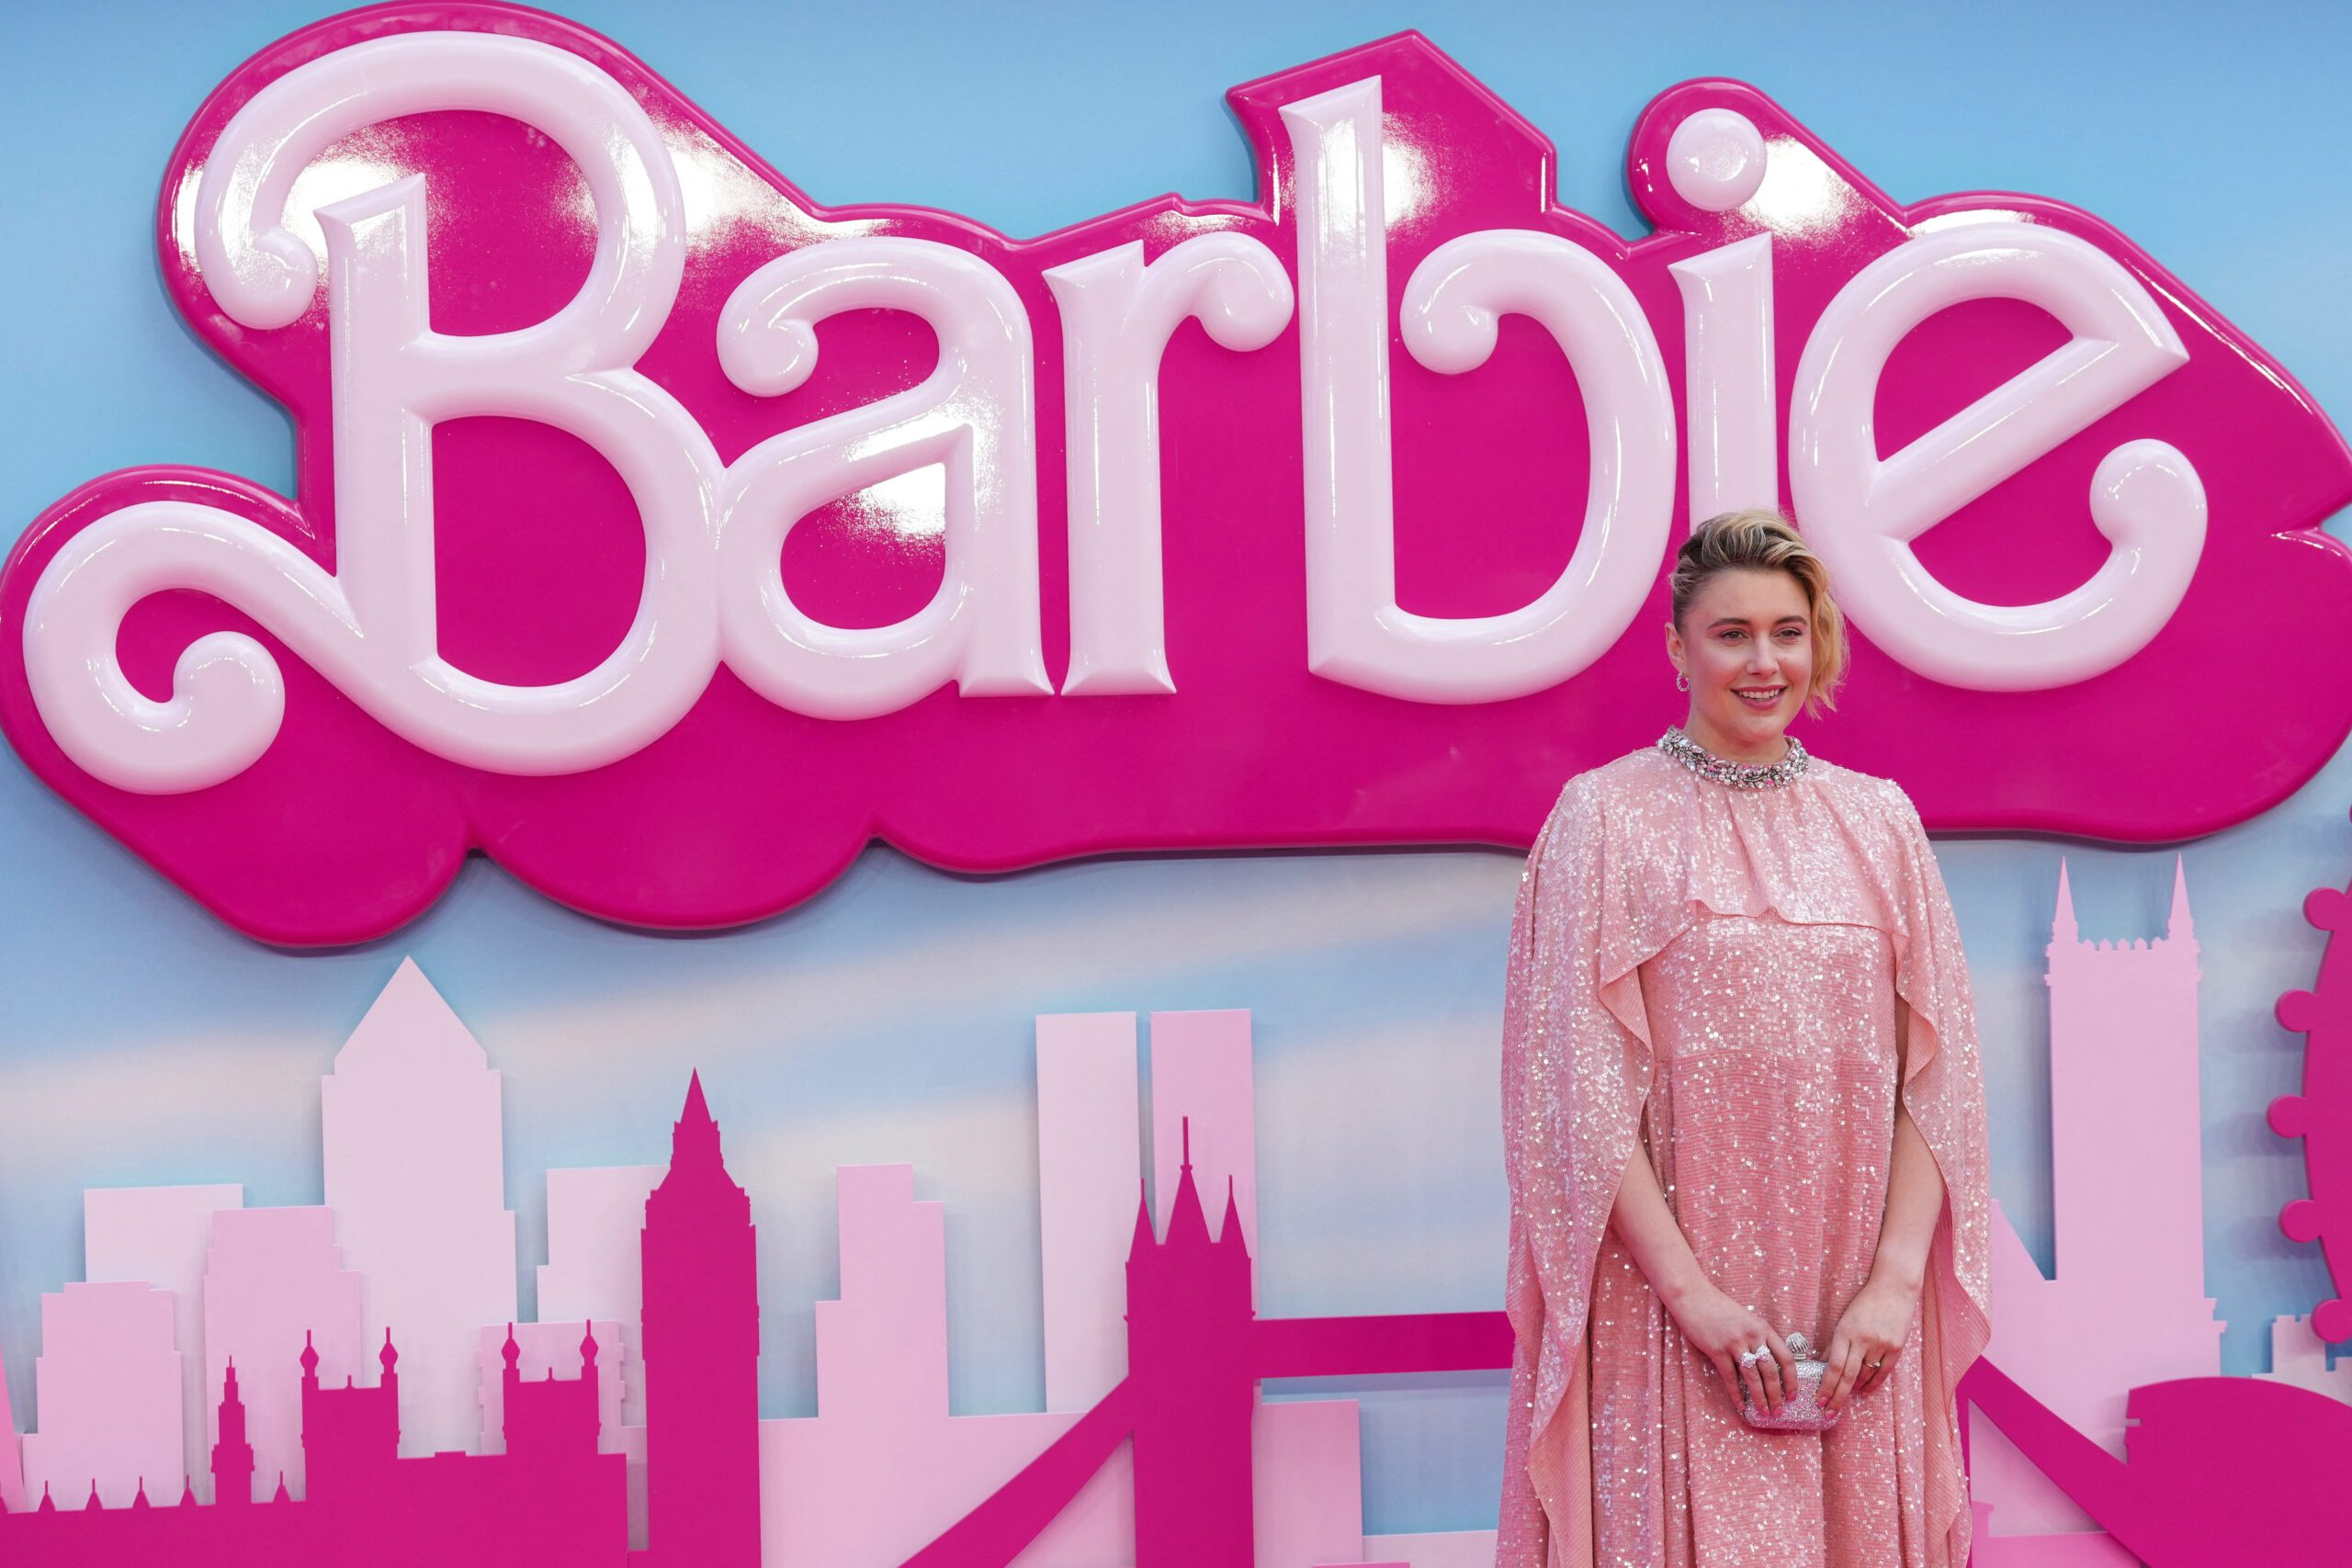 A Minute With: Greta Gerwig on making ‘Barbie’ a surprising movie